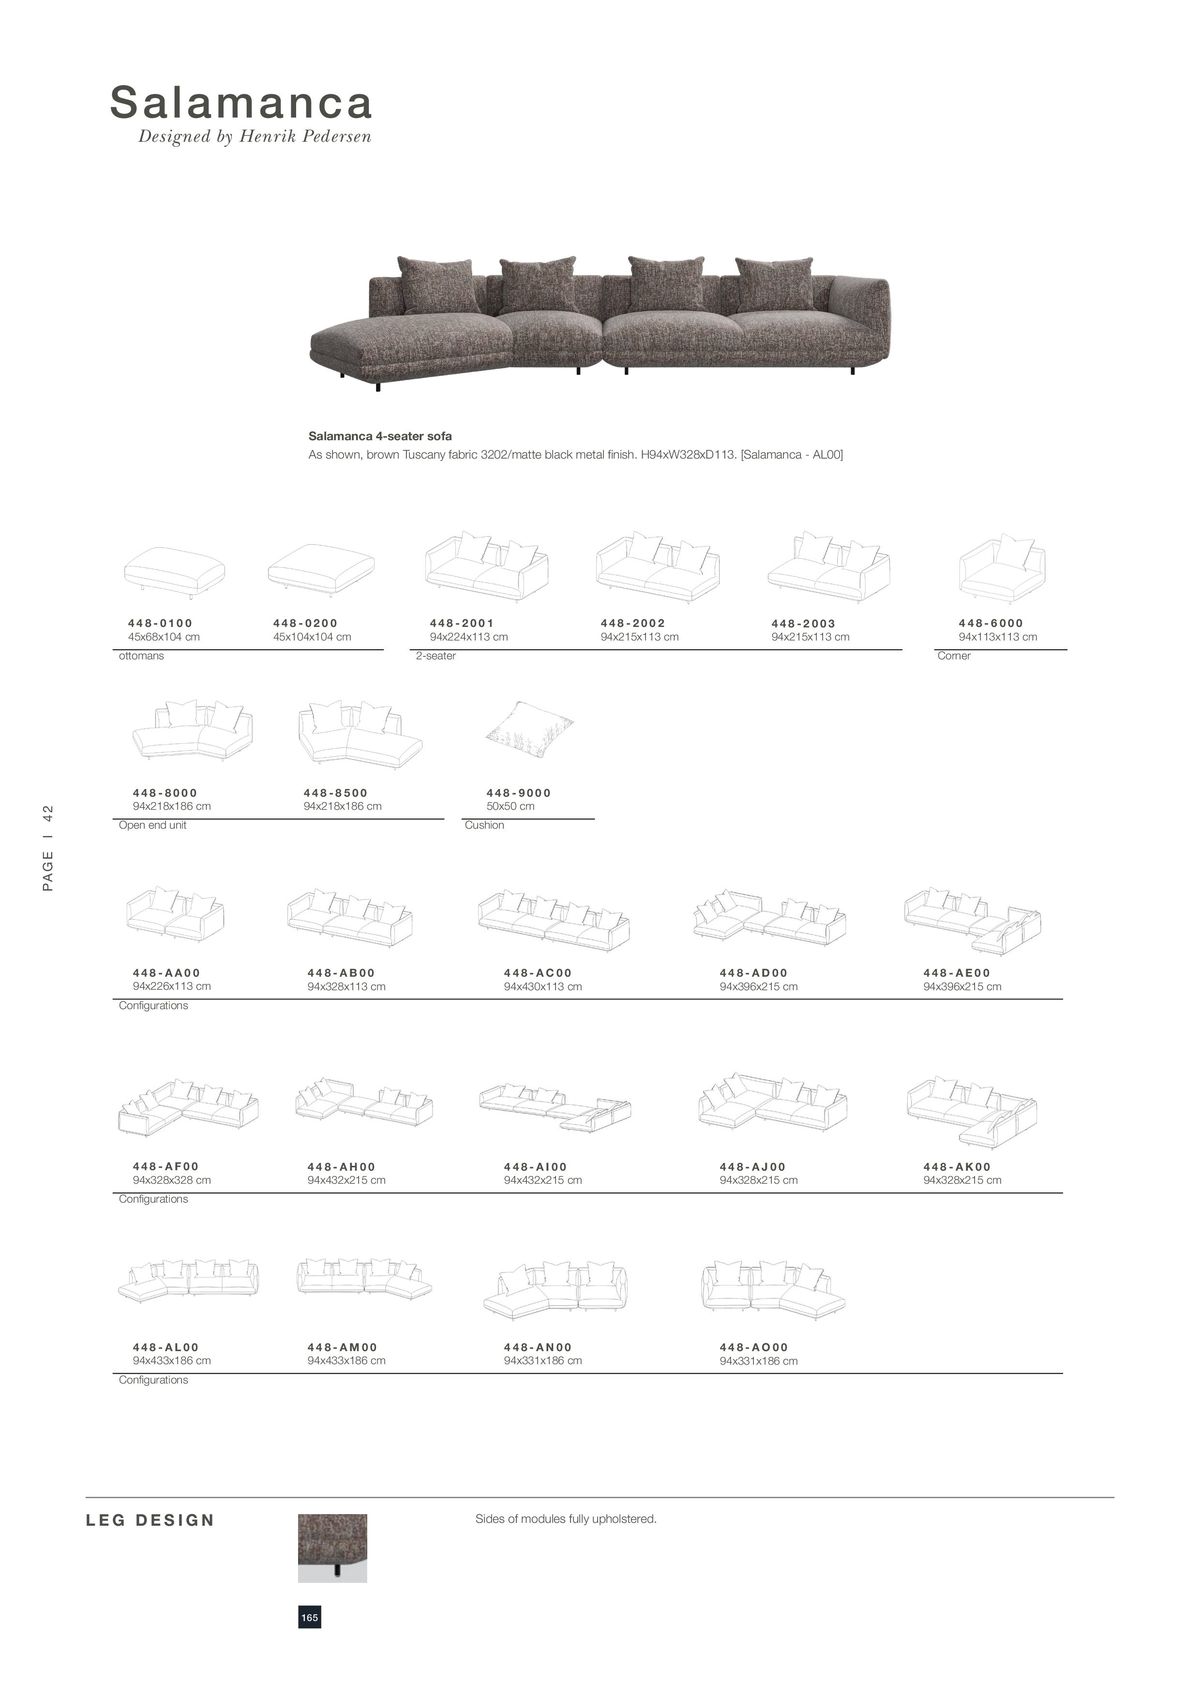 Catalogue Explore our extraordinary product overview contract, page 00042